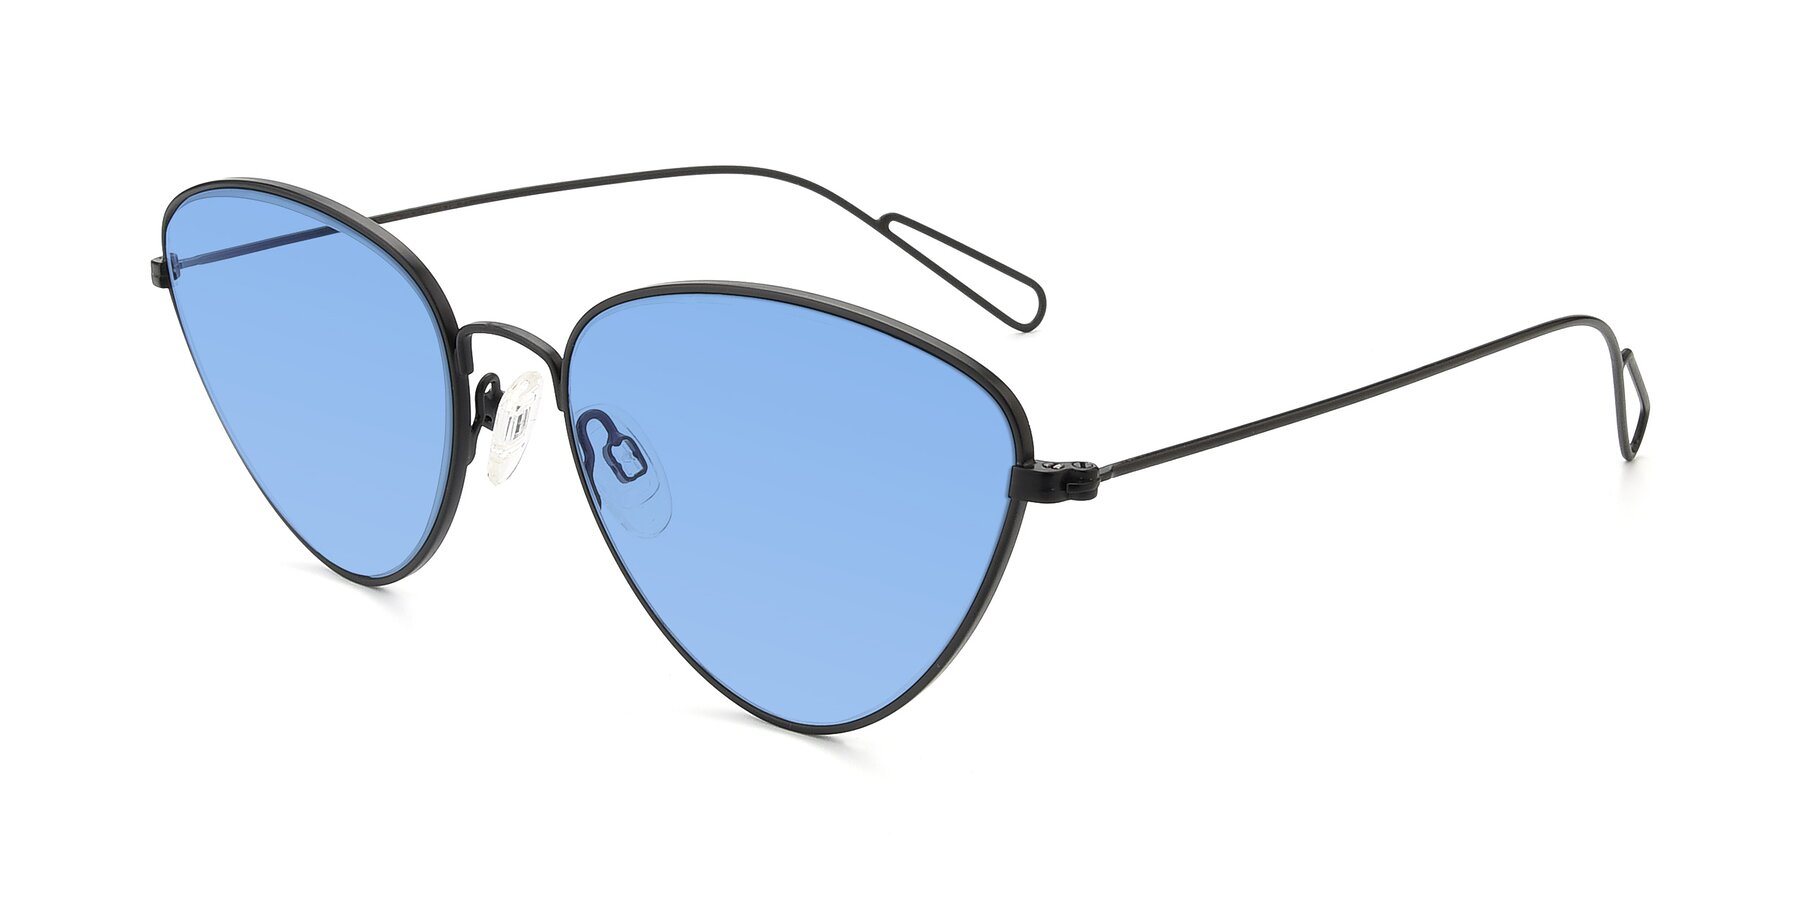 Angle of Butterfly Effect in Black with Medium Blue Tinted Lenses